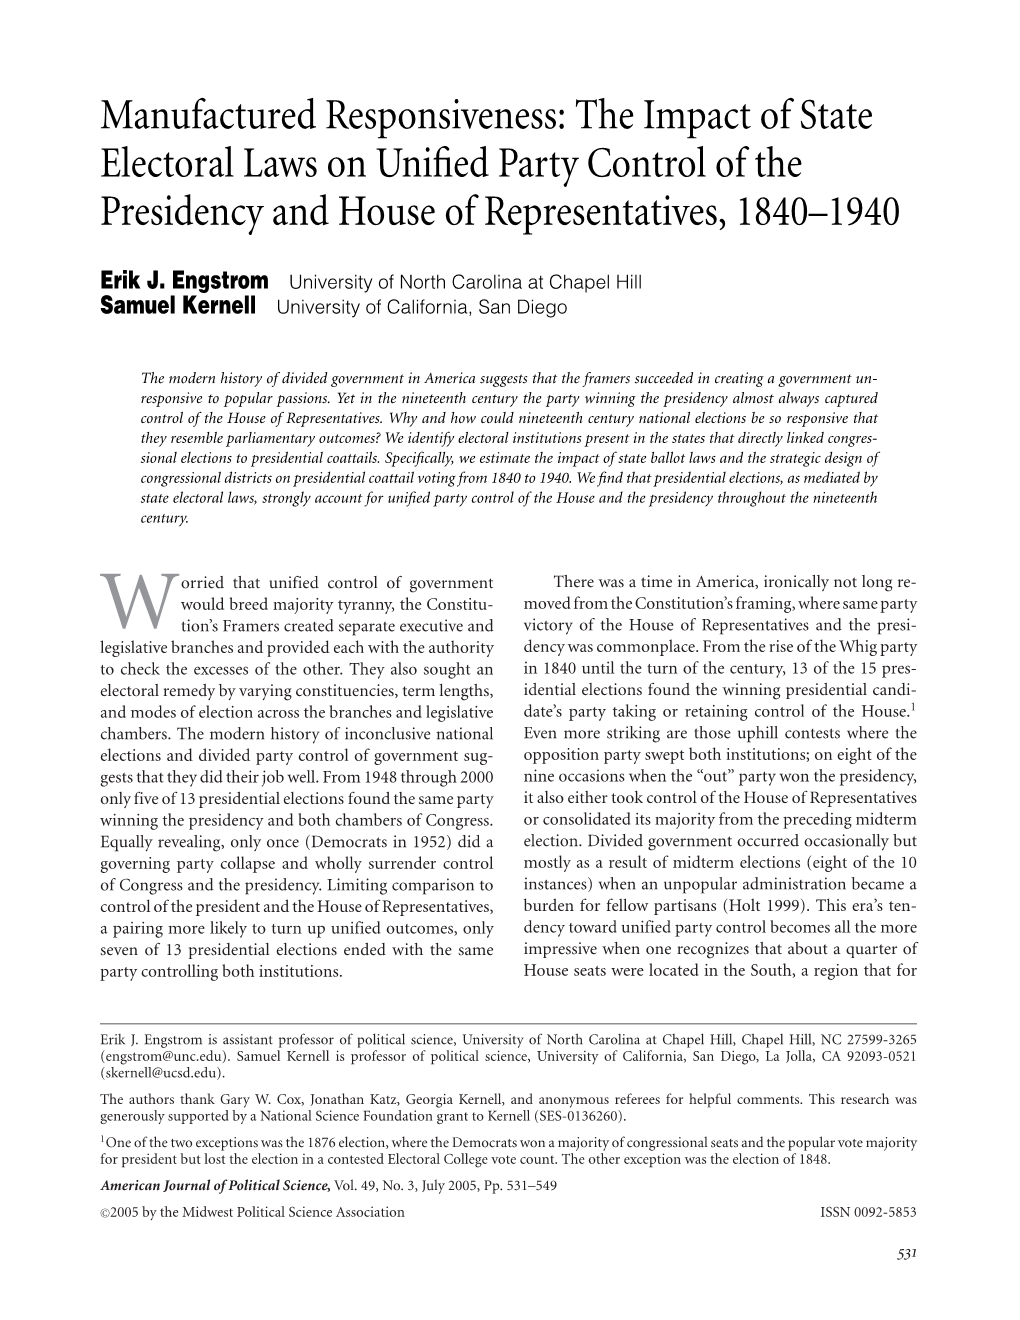 Manufactured Responsiveness: the Impact of State Electoral Laws on Uniﬁed Party Control of the Presidency and House of Representatives, 1840–1940